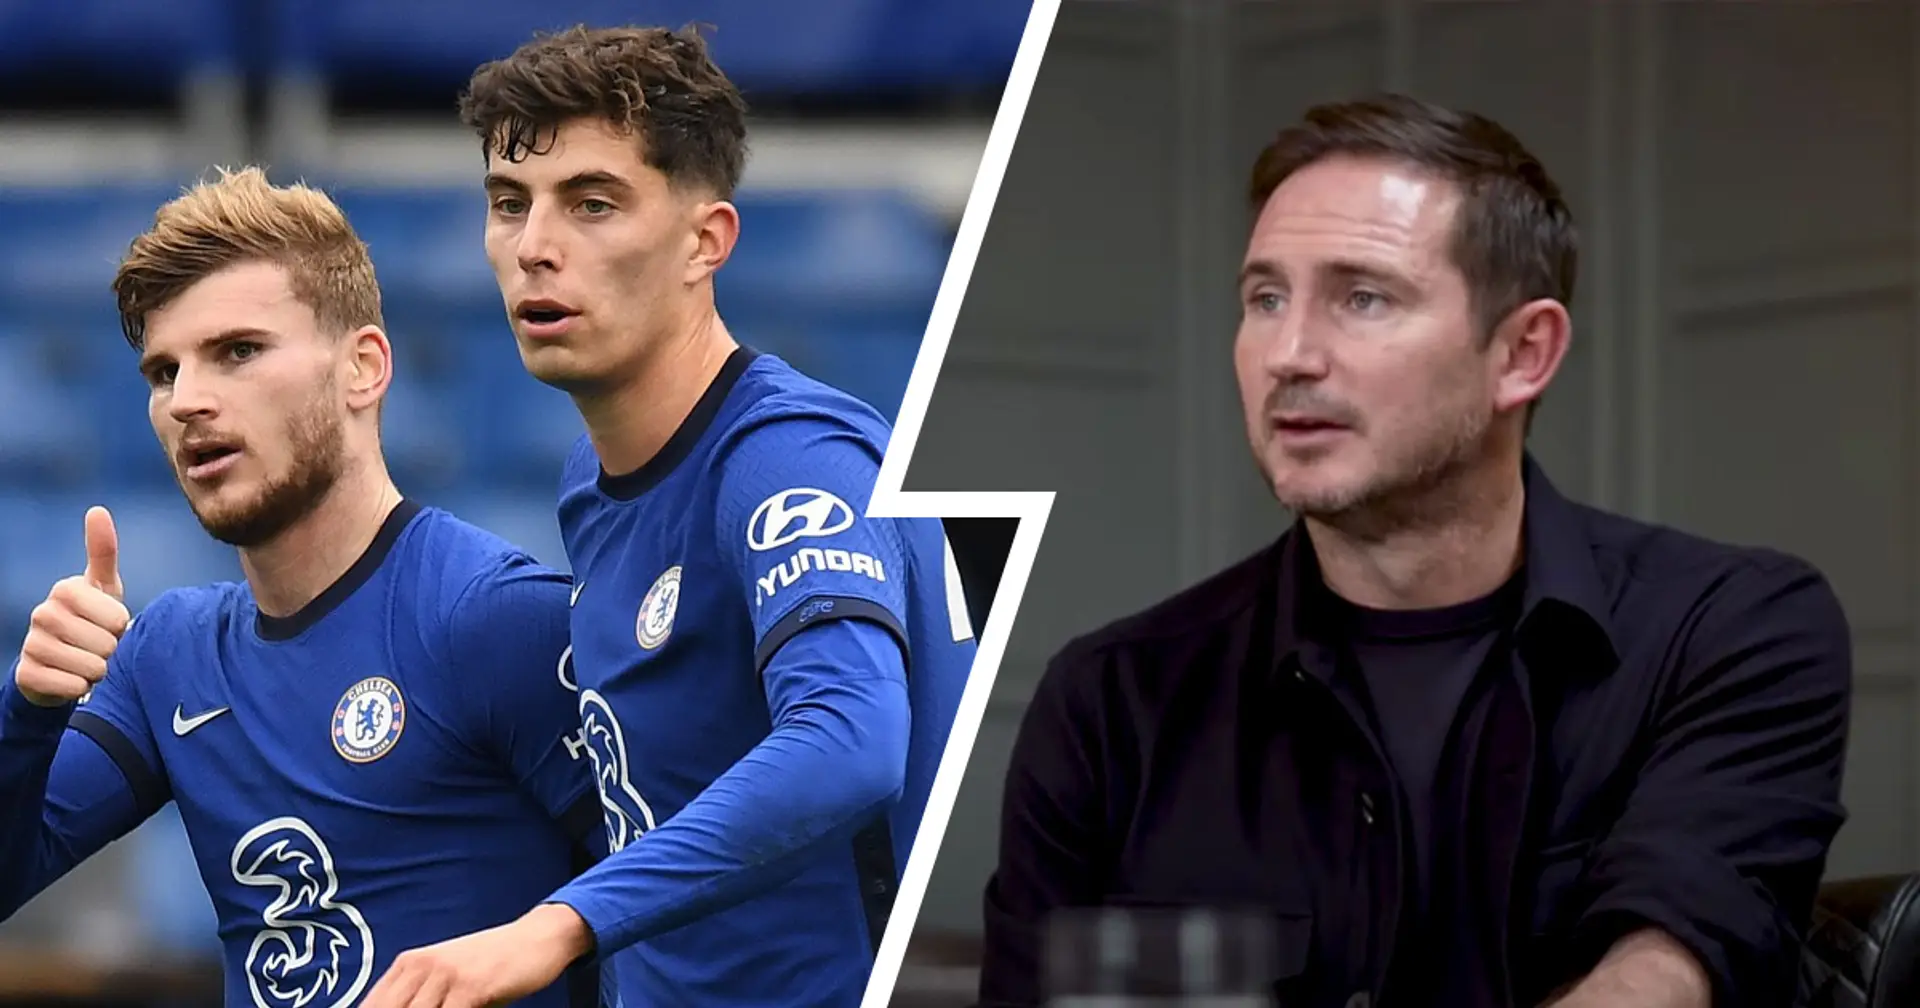 'They were shocked by physical demands': Lampard opens up on adaptation issues for Werner and Havertz